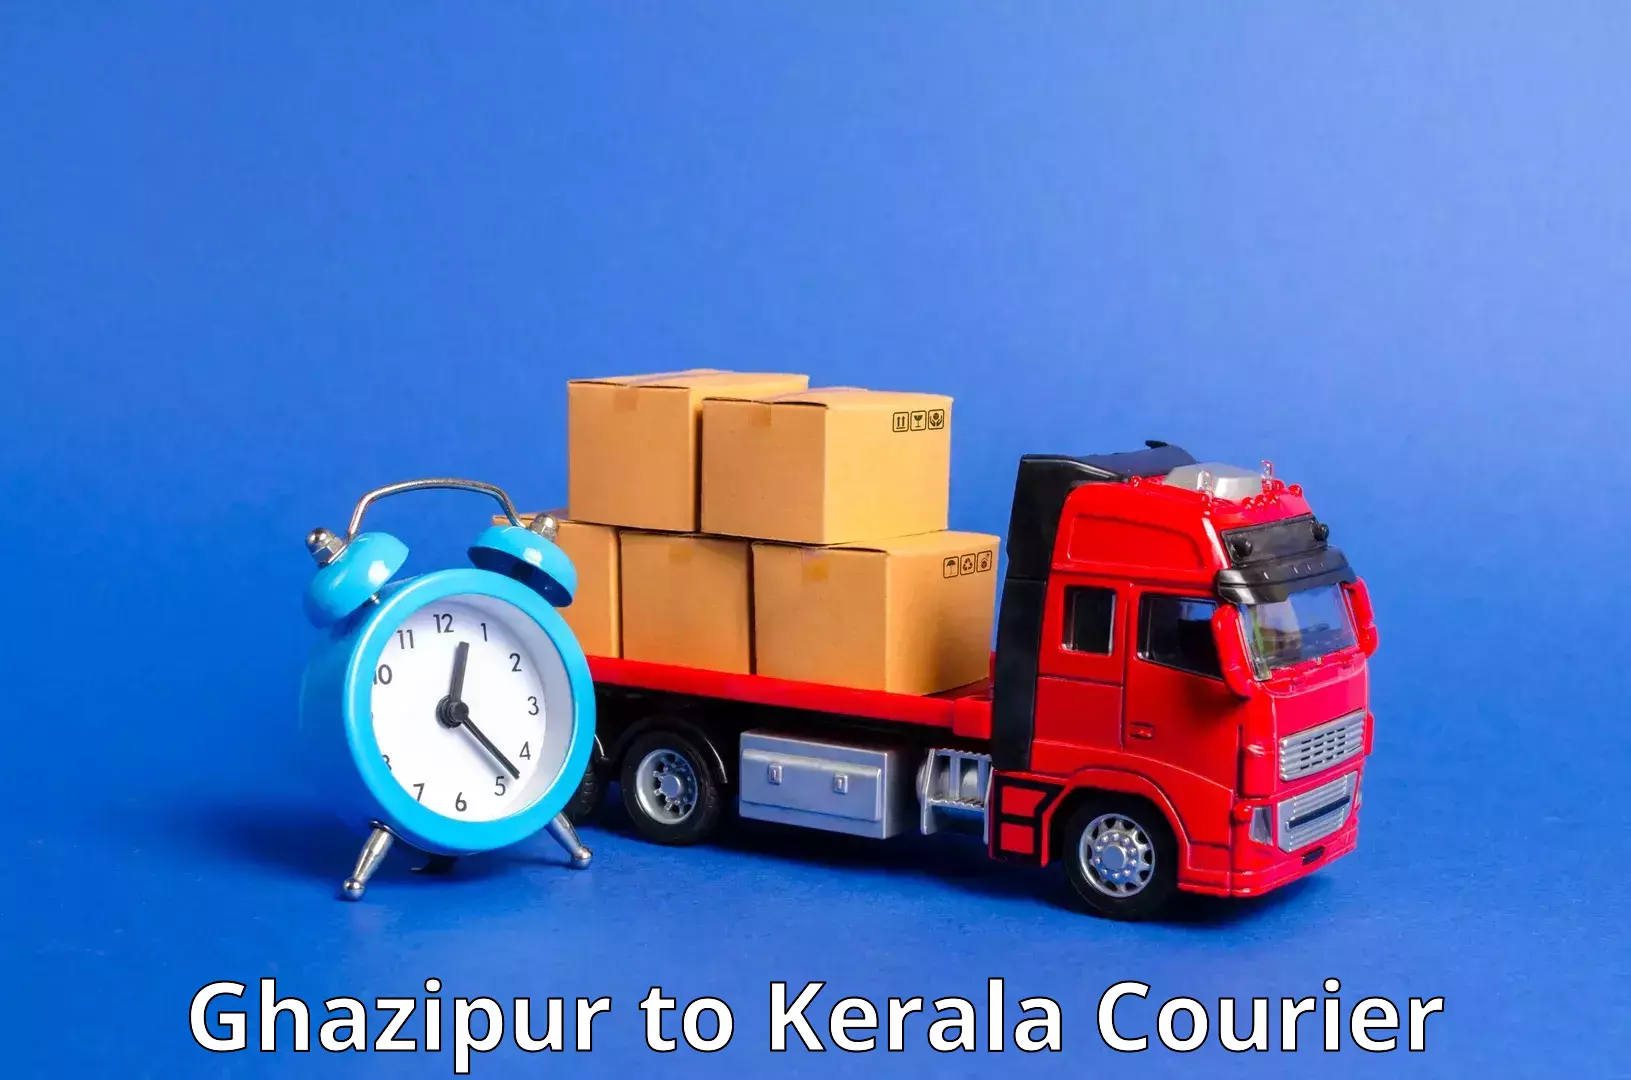 Express delivery network Ghazipur to Guruvayoor